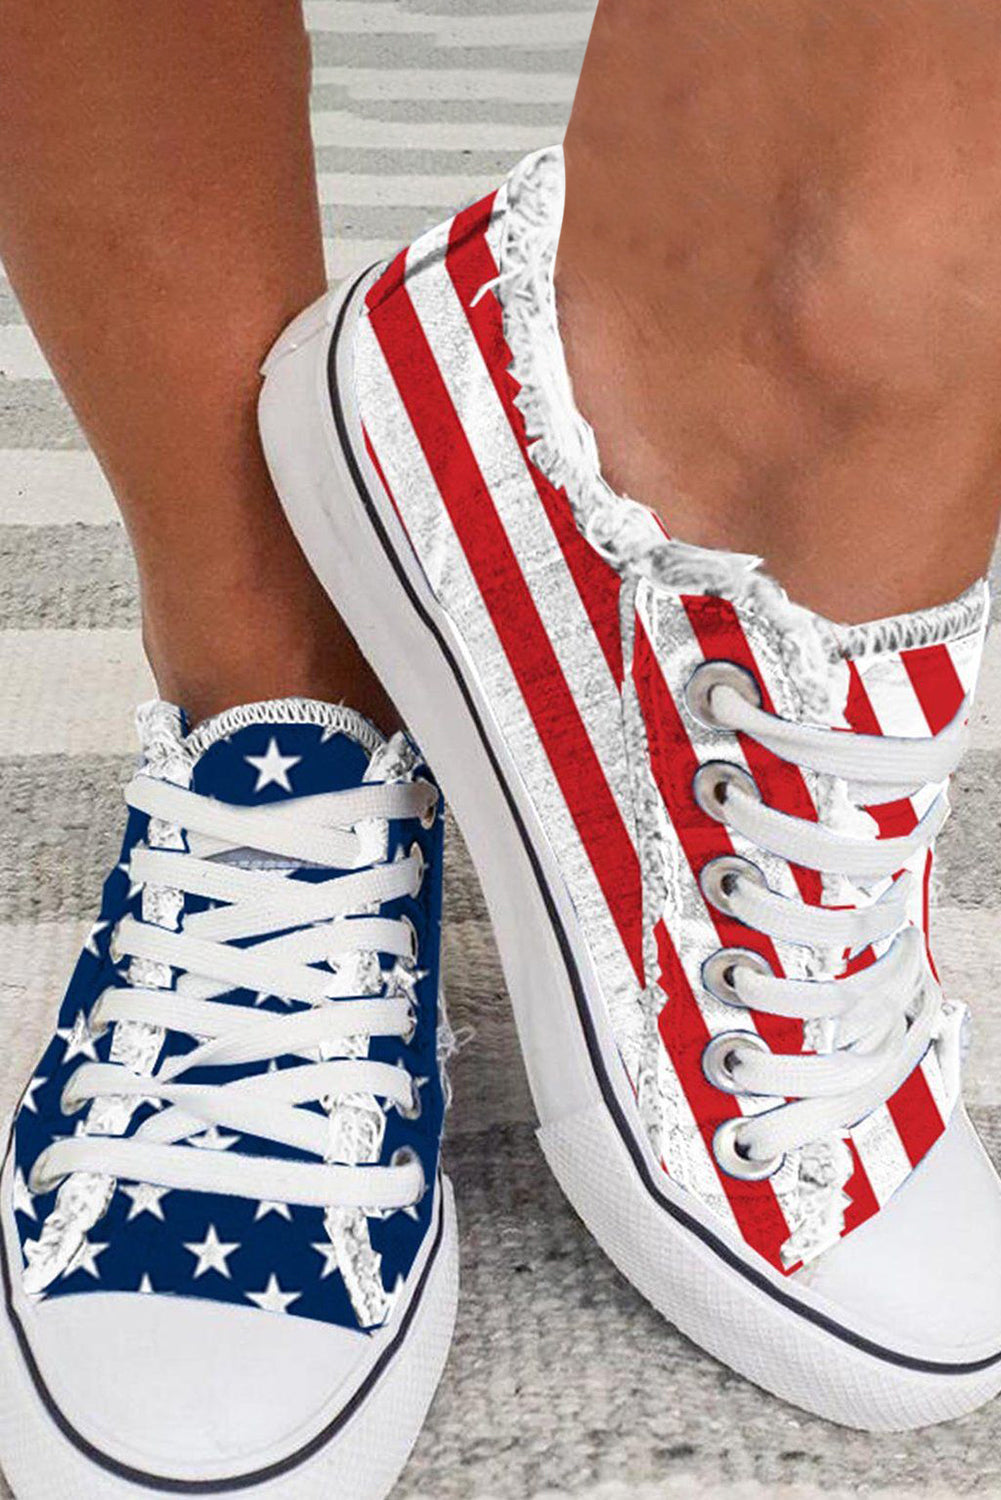 a close up of a person's shoes with an american flag design